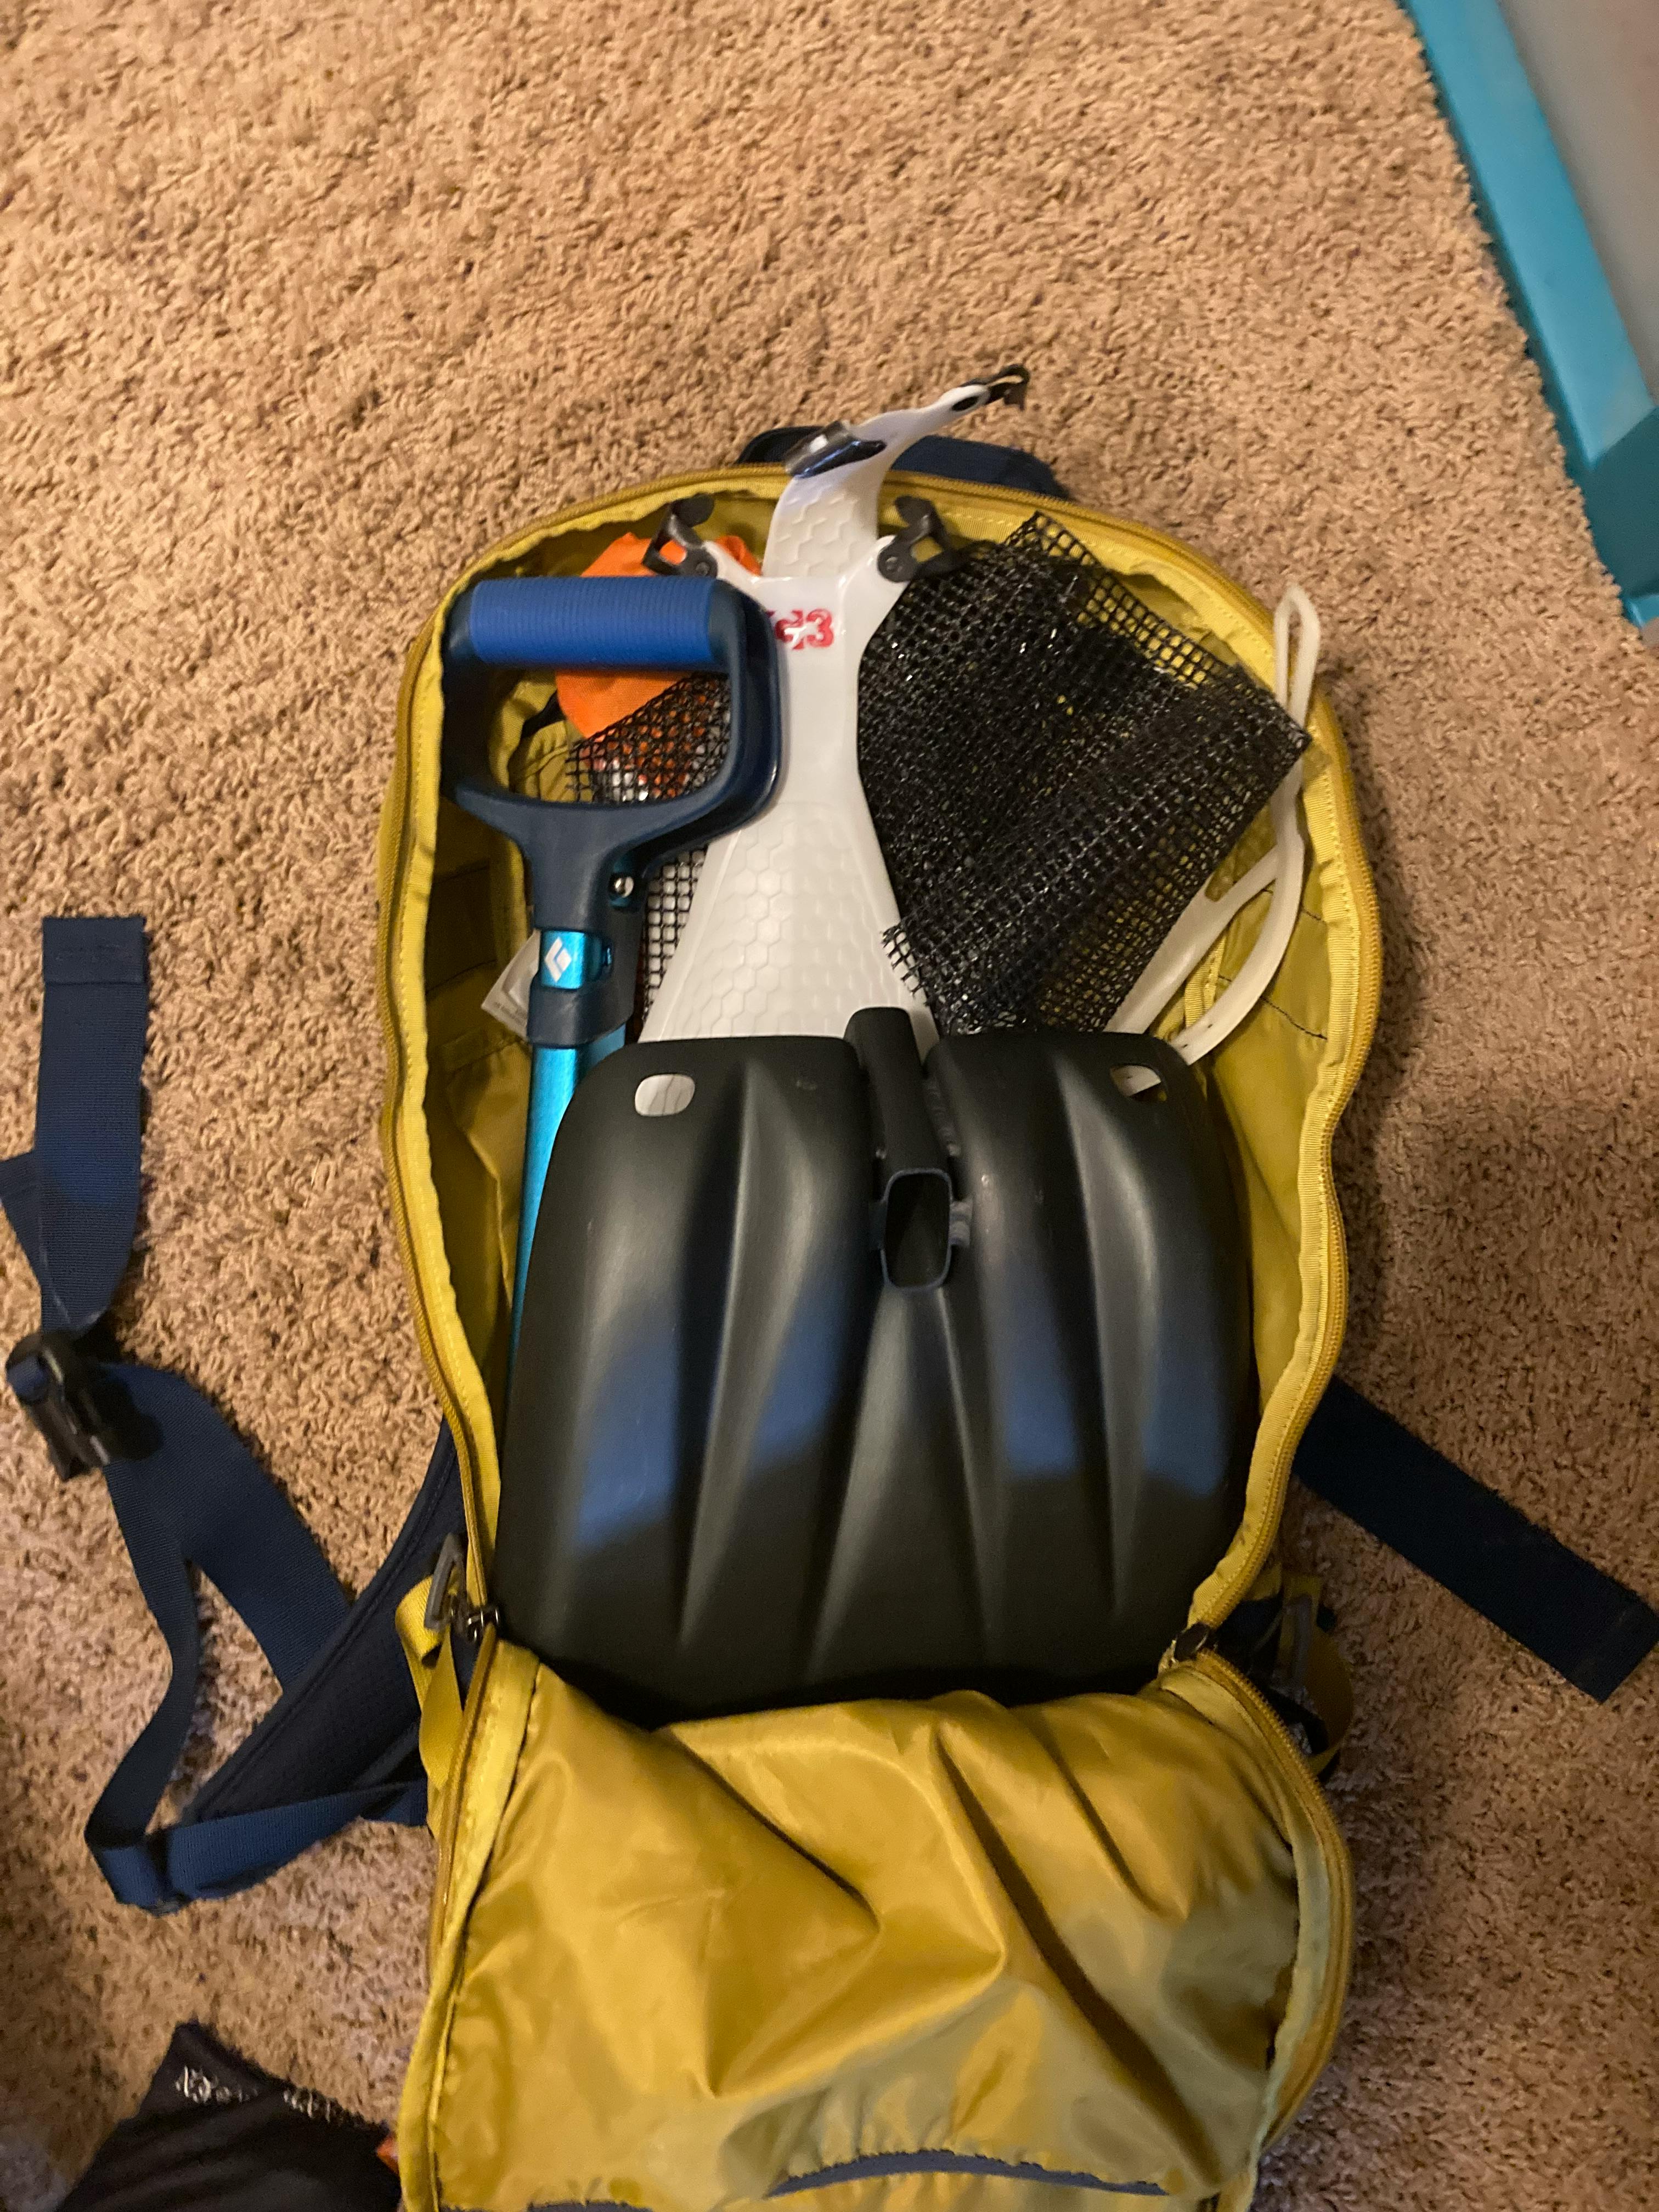 A shovel and some other tools in a Patagonia Snowdrifter 20L backpack.